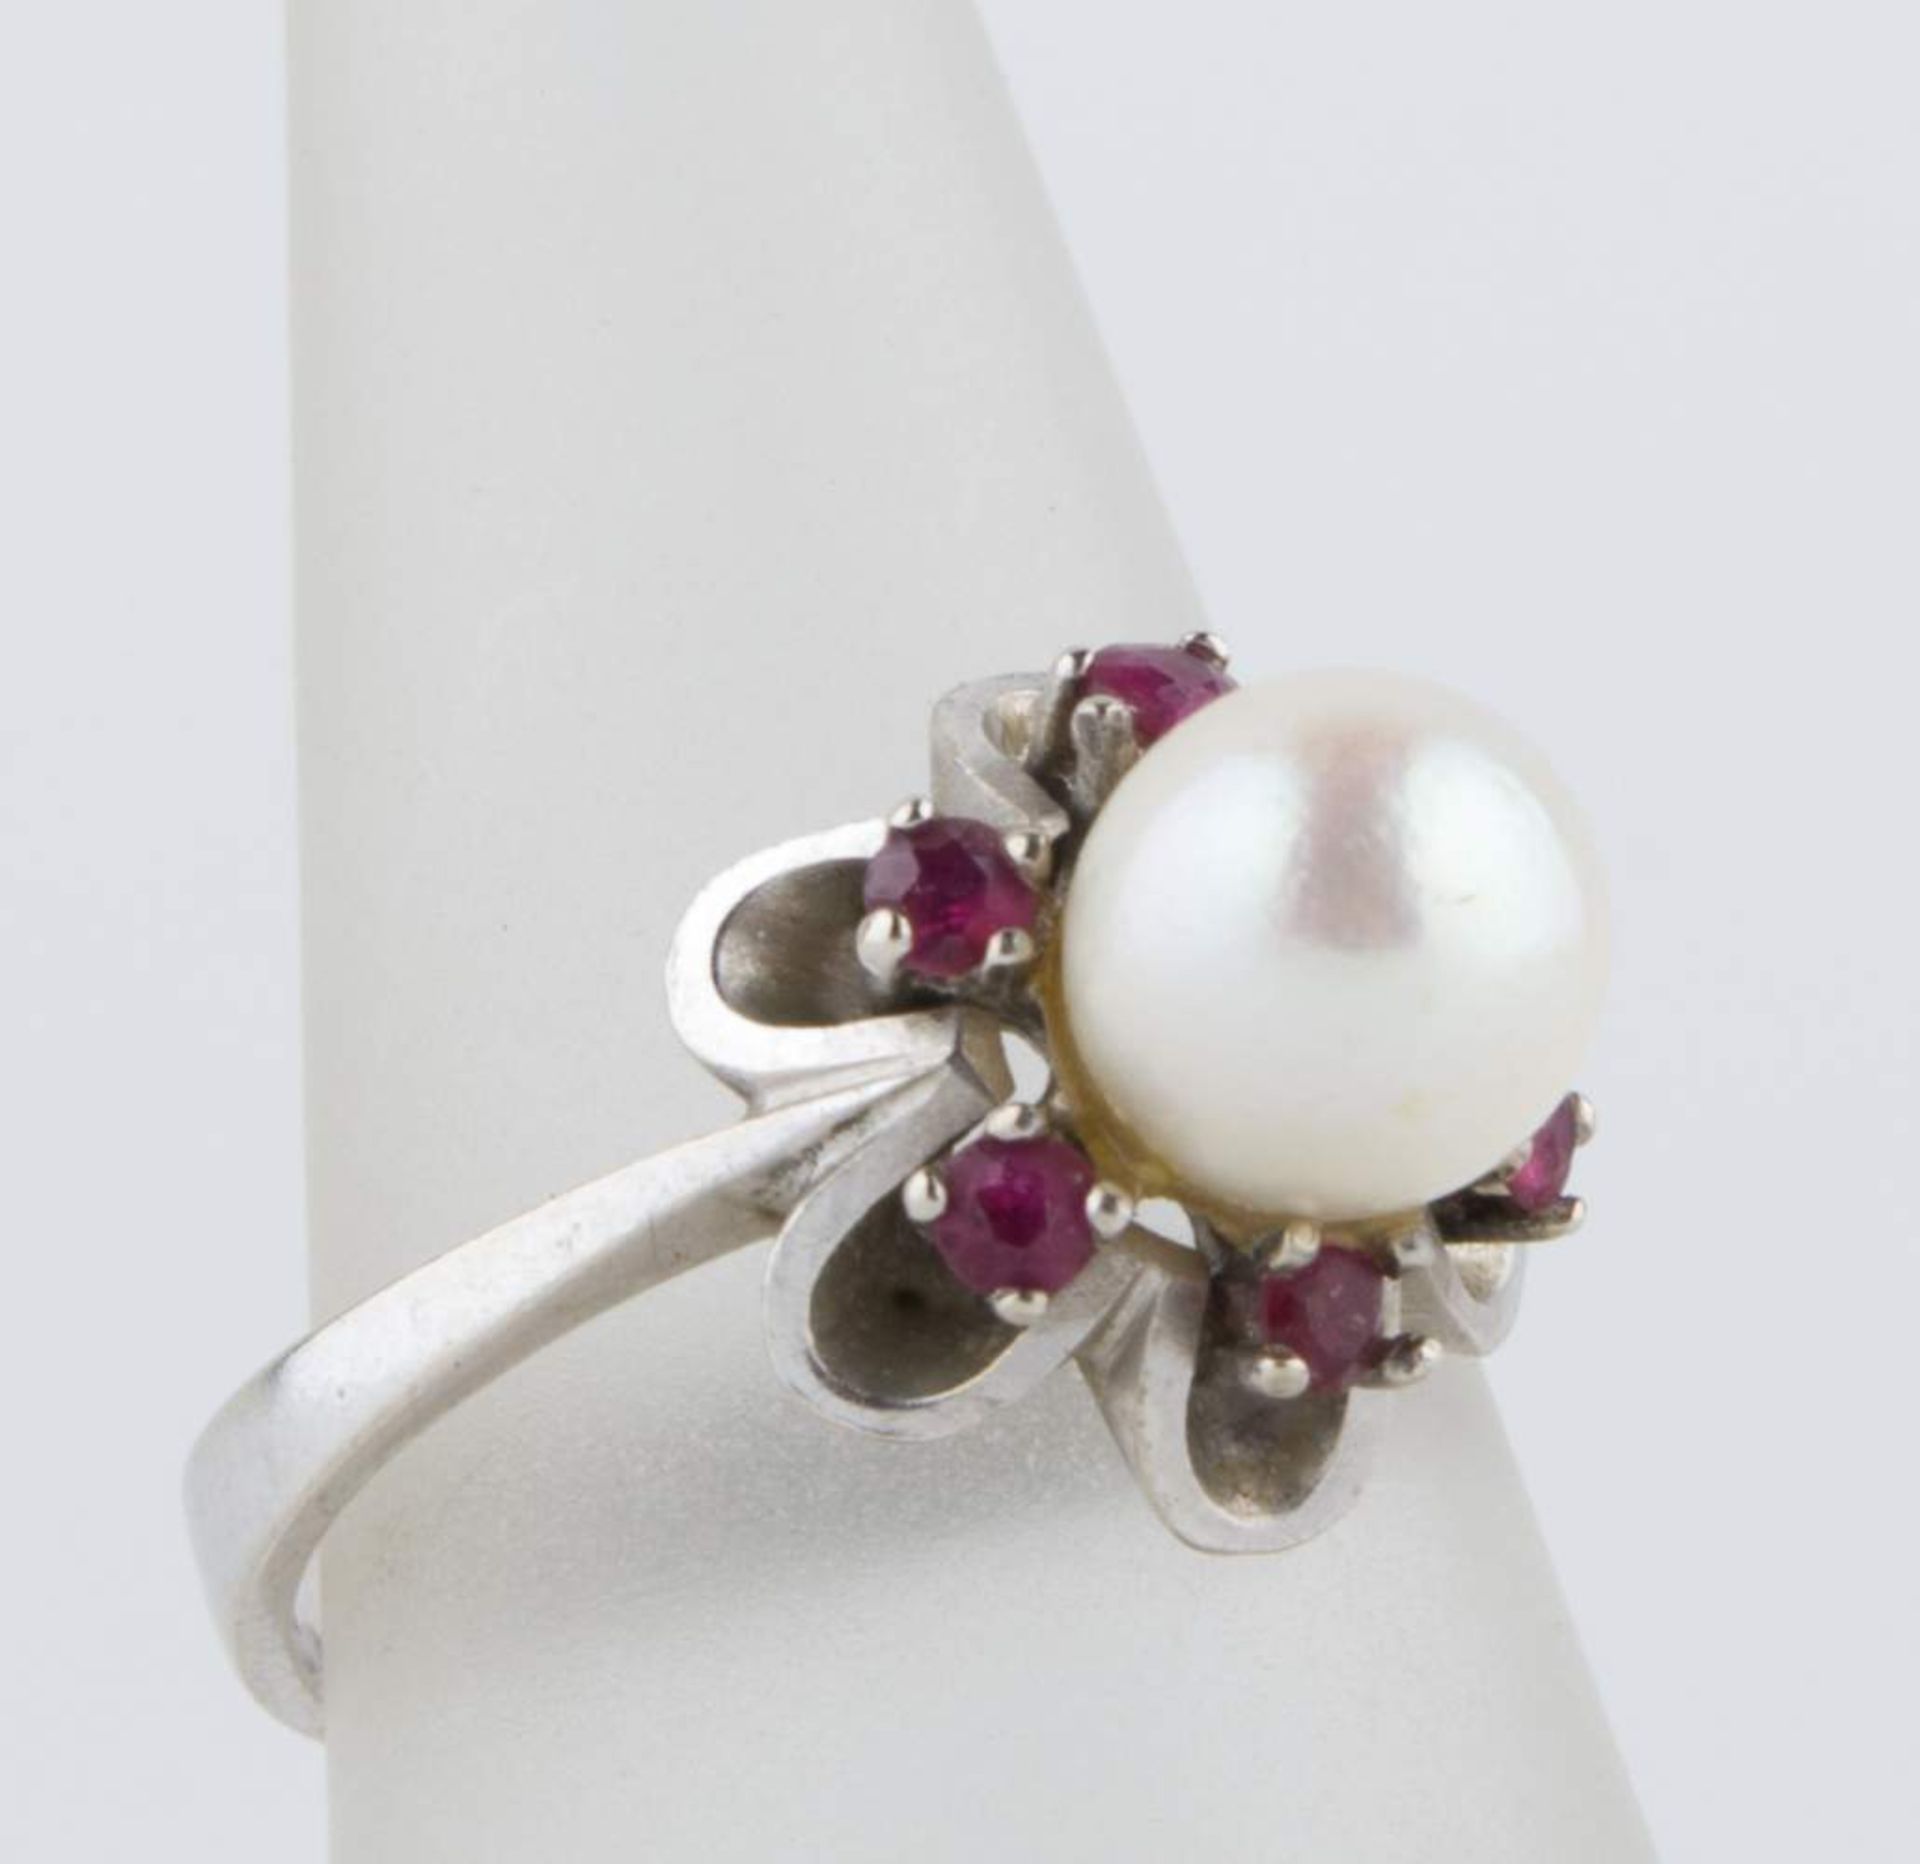 Damenring / Women´s ringmit Perle und Rubinen, 5 g, RG: 58 /with pearls and rubys, 5 g.